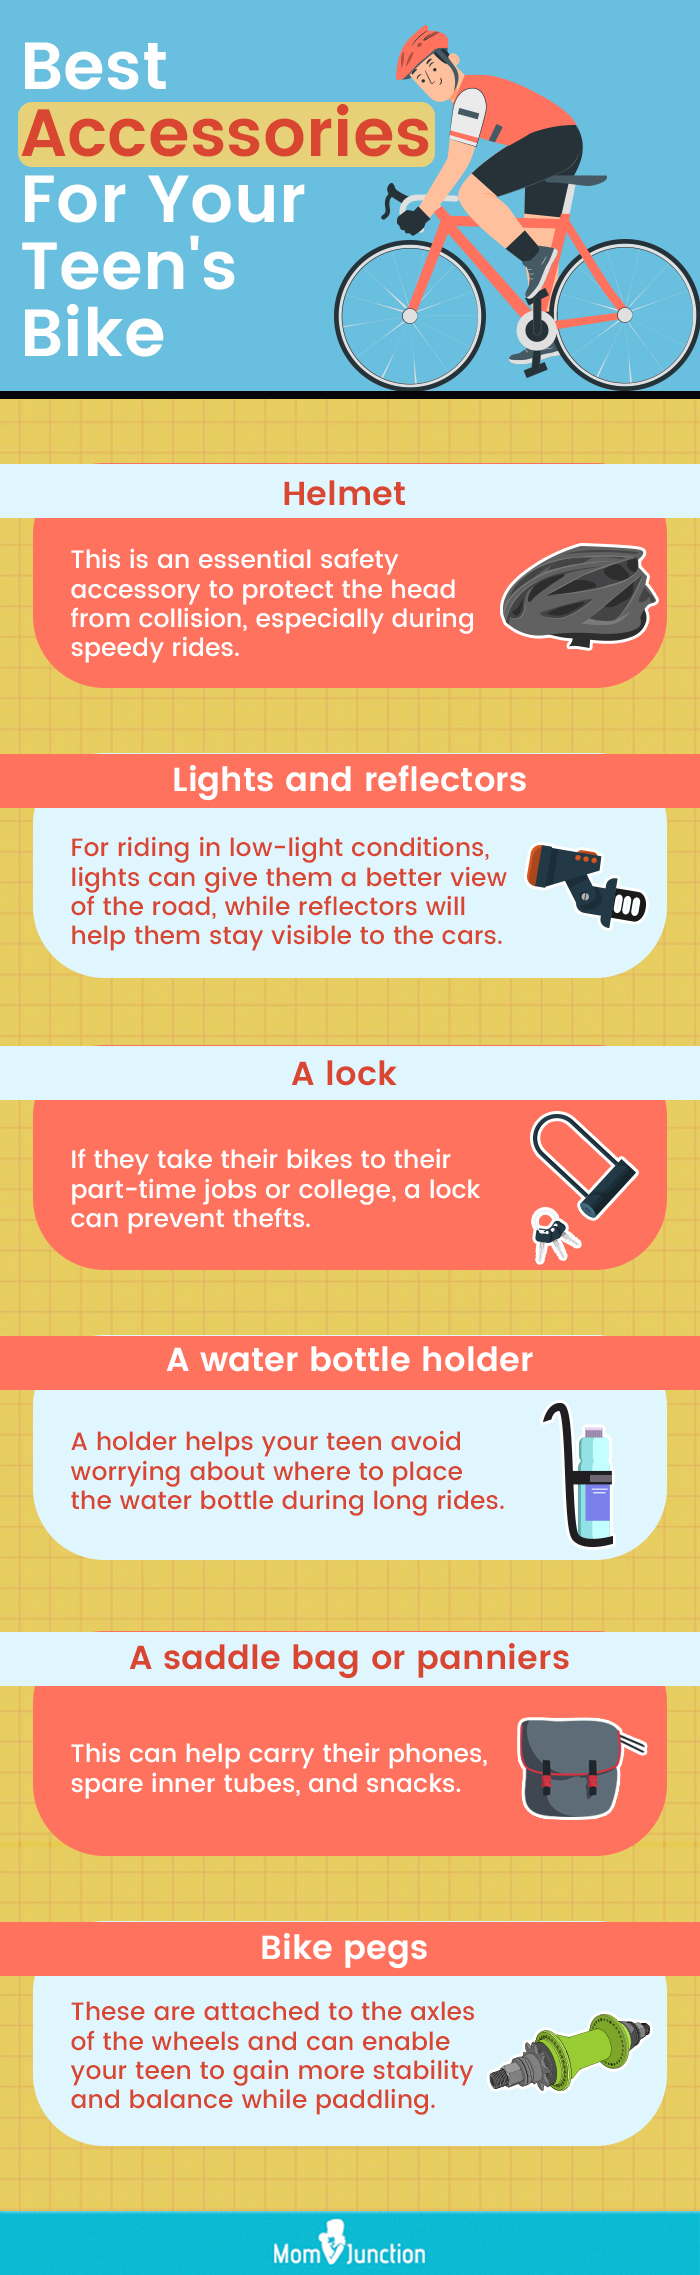 Best Accessories For Your Teen's Bike (infographic)